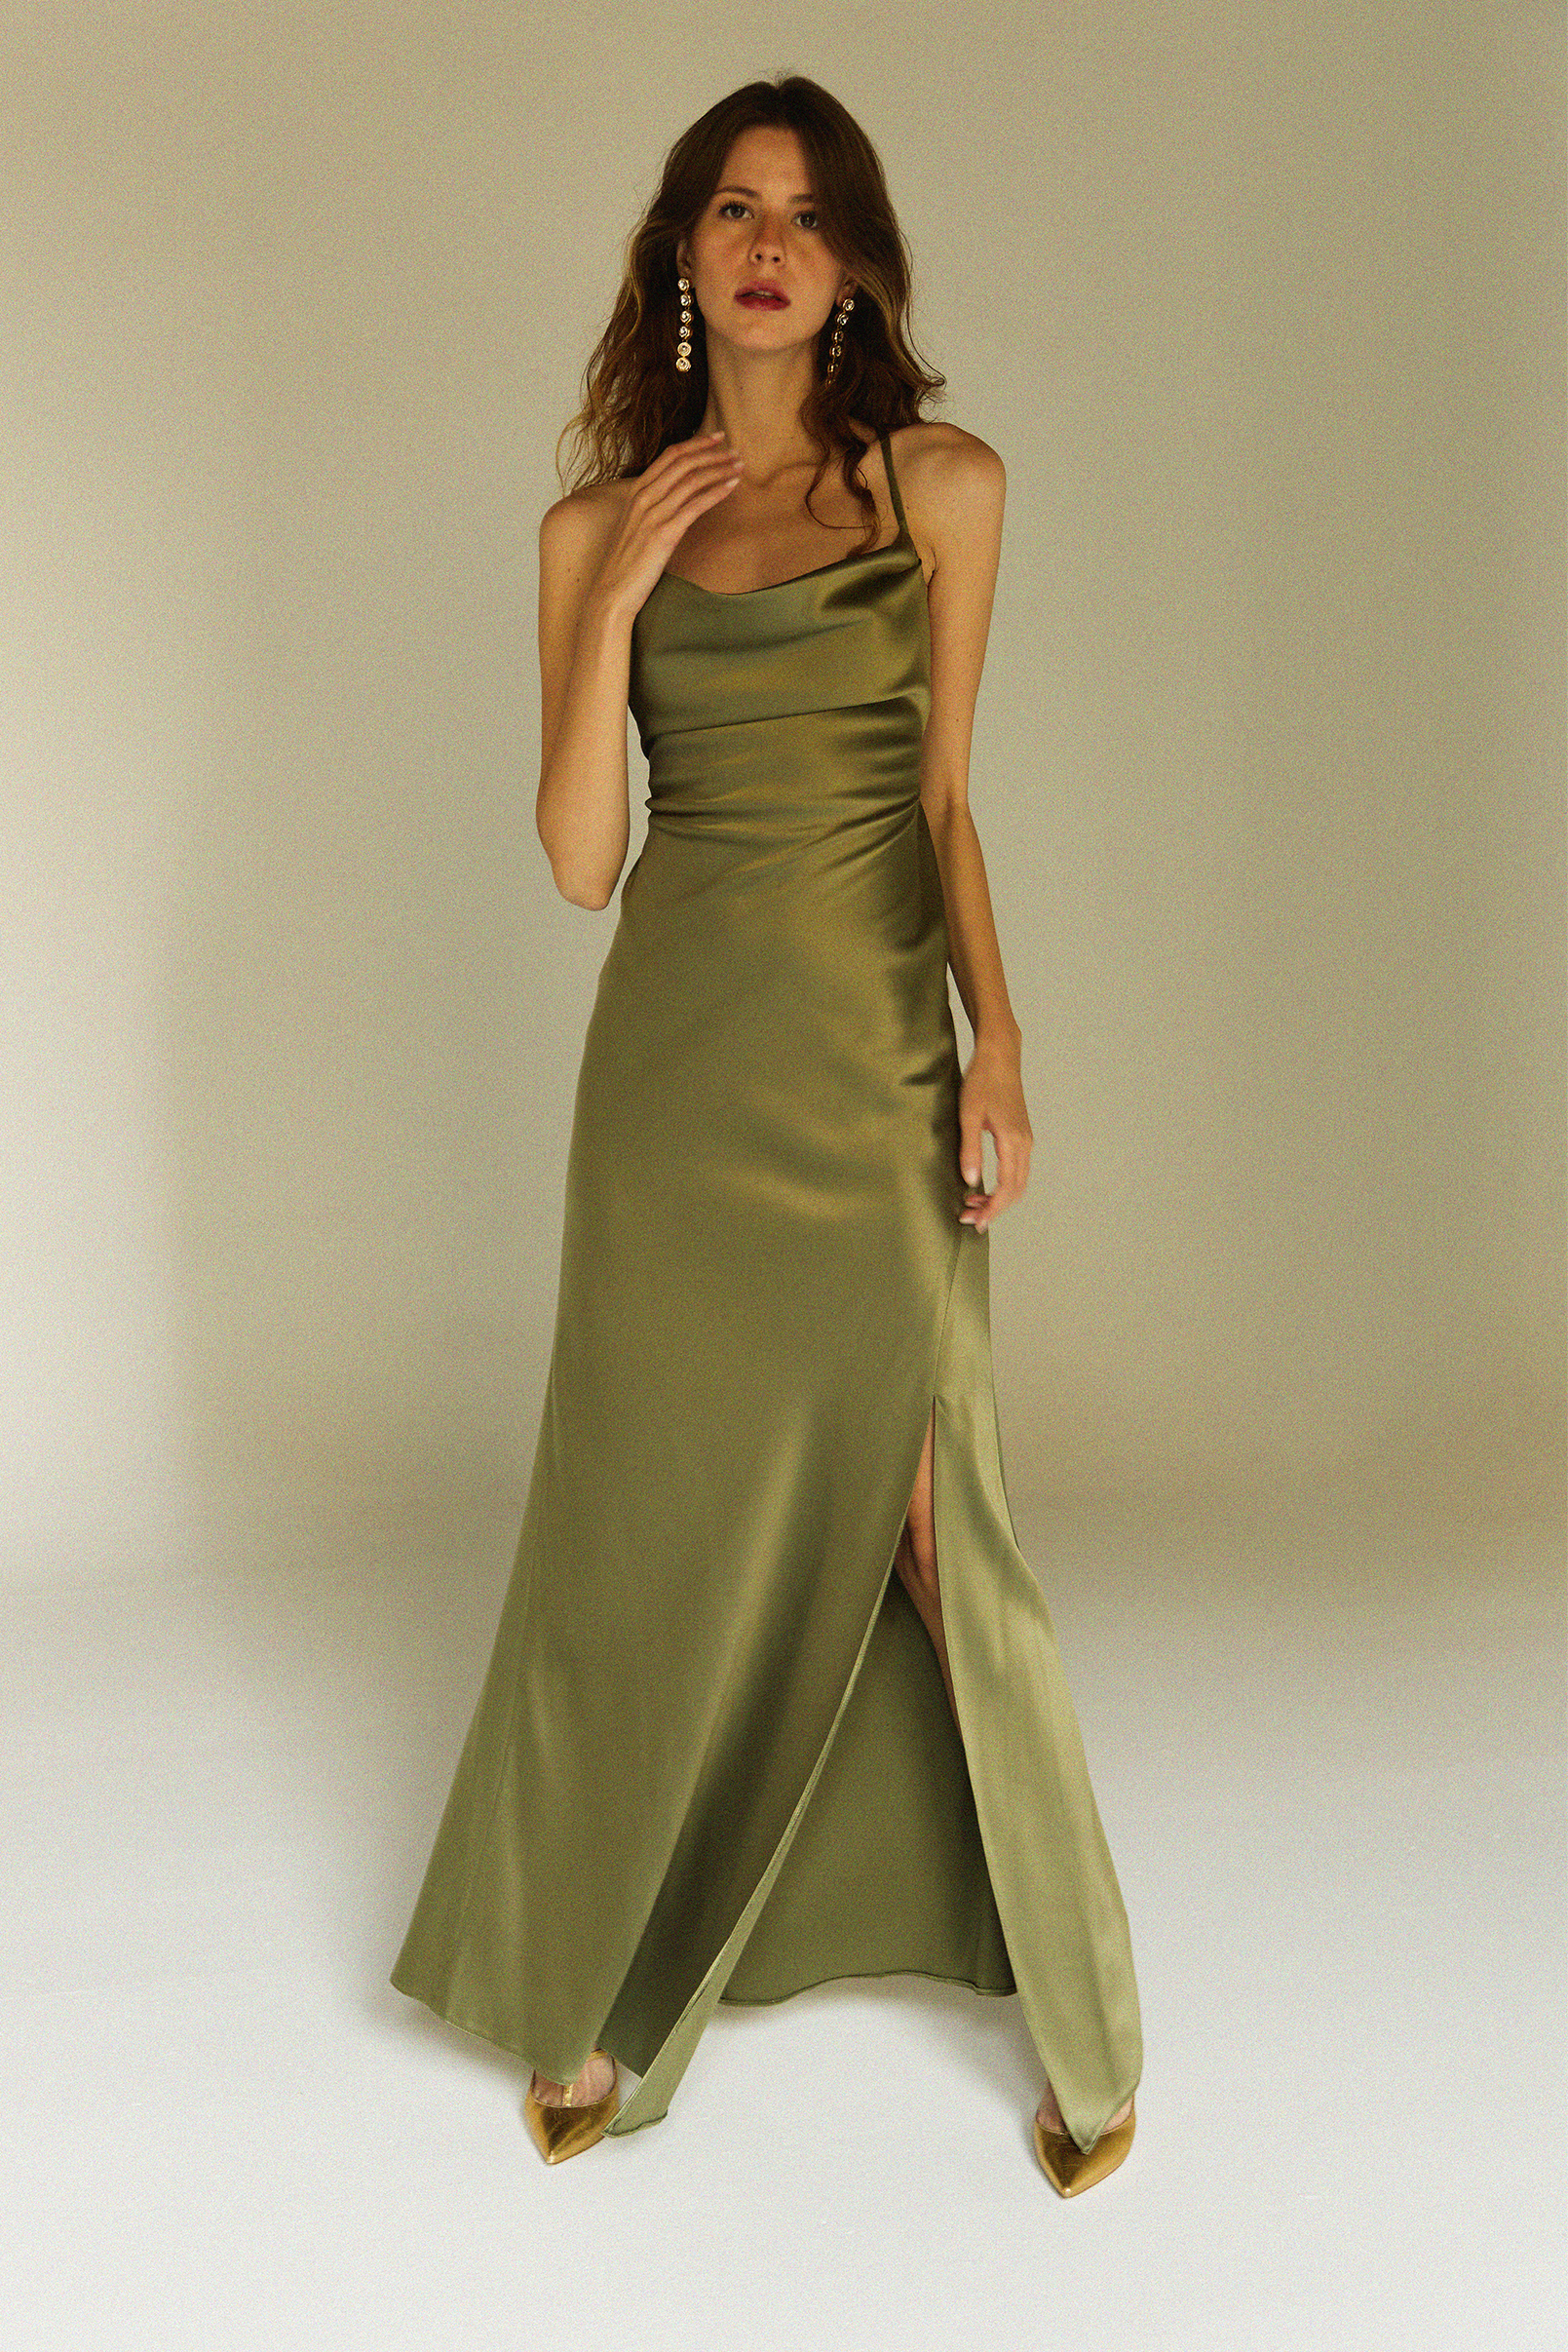 The Backless Satin in Olive